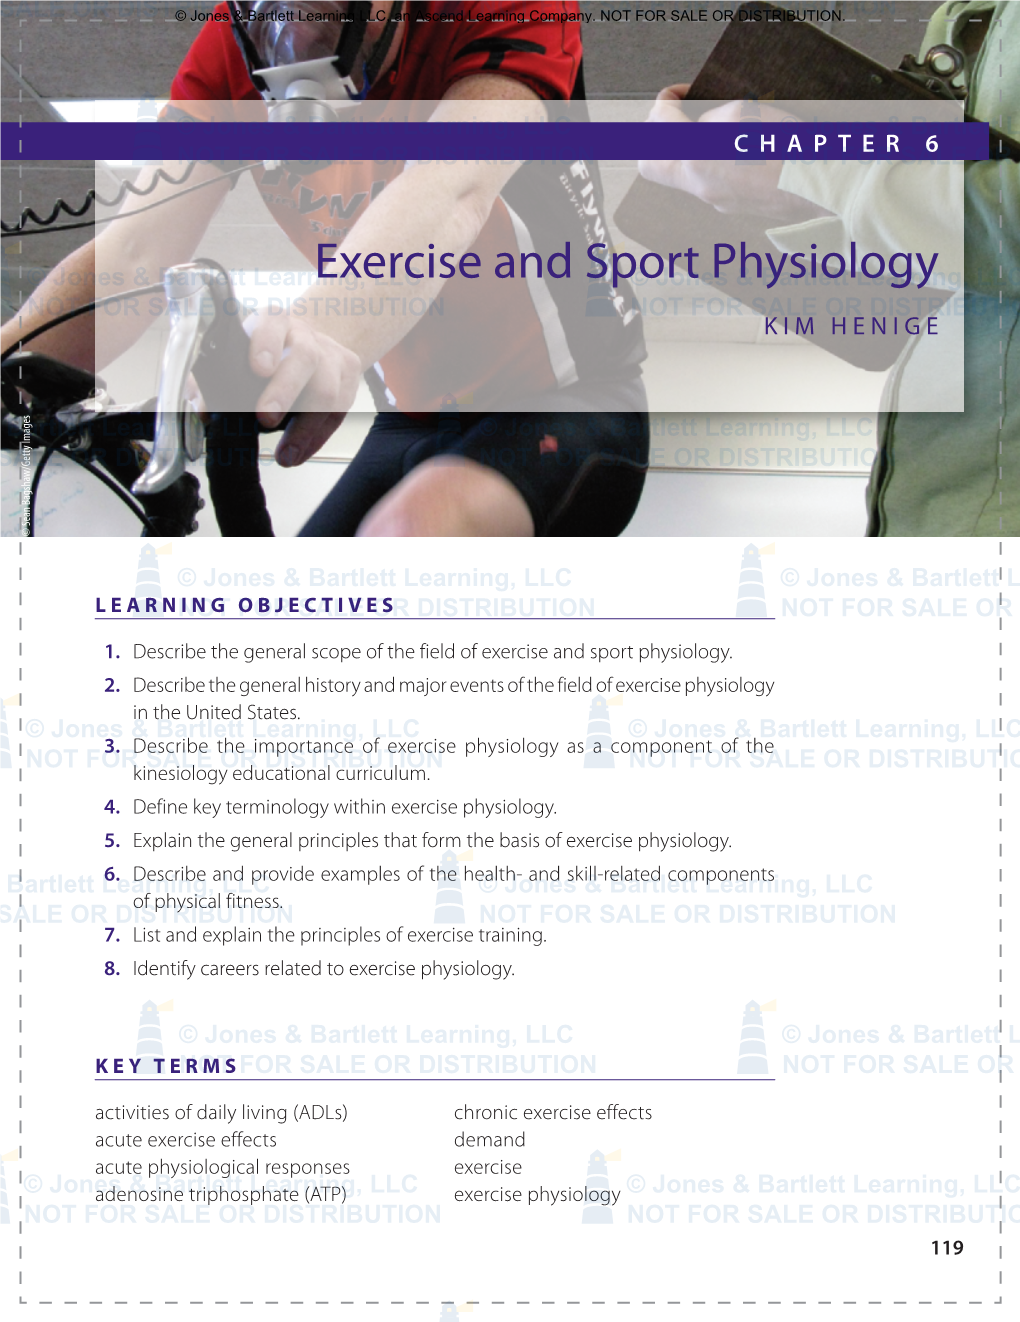 Exercise and Sport Physiology